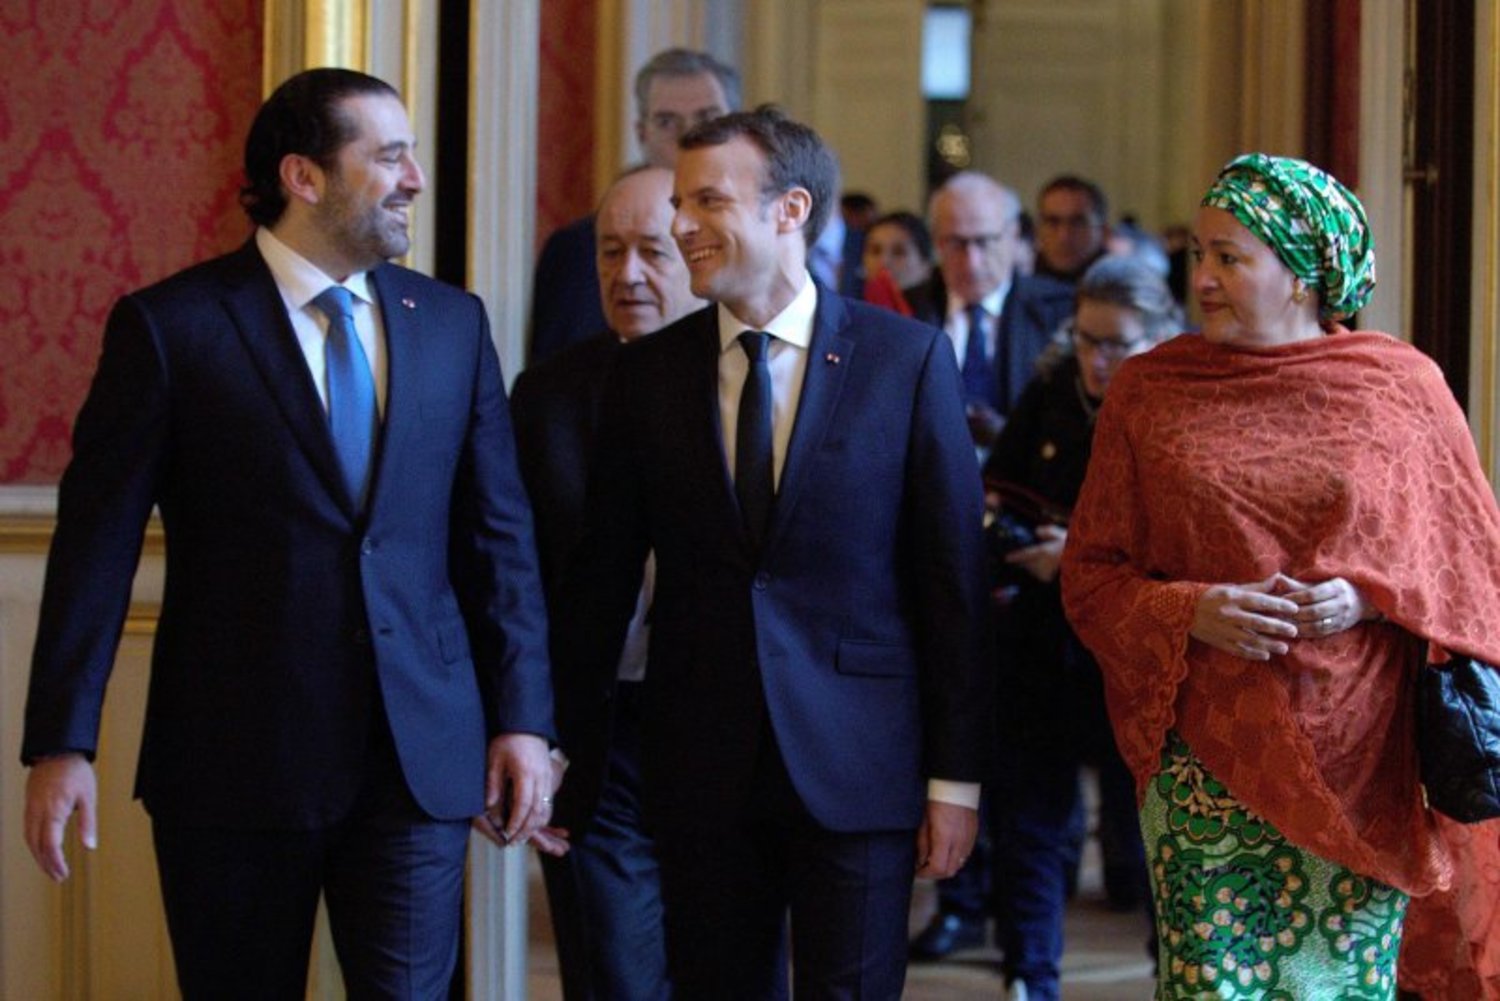 French President Emmanuel Macron (C) walks between Lebanon's Prime Minister Saad Hariri (L) and UN Deputy Secretary General Amina Mohammed (R) as they arrive to attend the Lebanon International Support Group meeting in Paris on Decdember 8, 2017.  PHILIPPE WOJAZER / POOL / AFP 